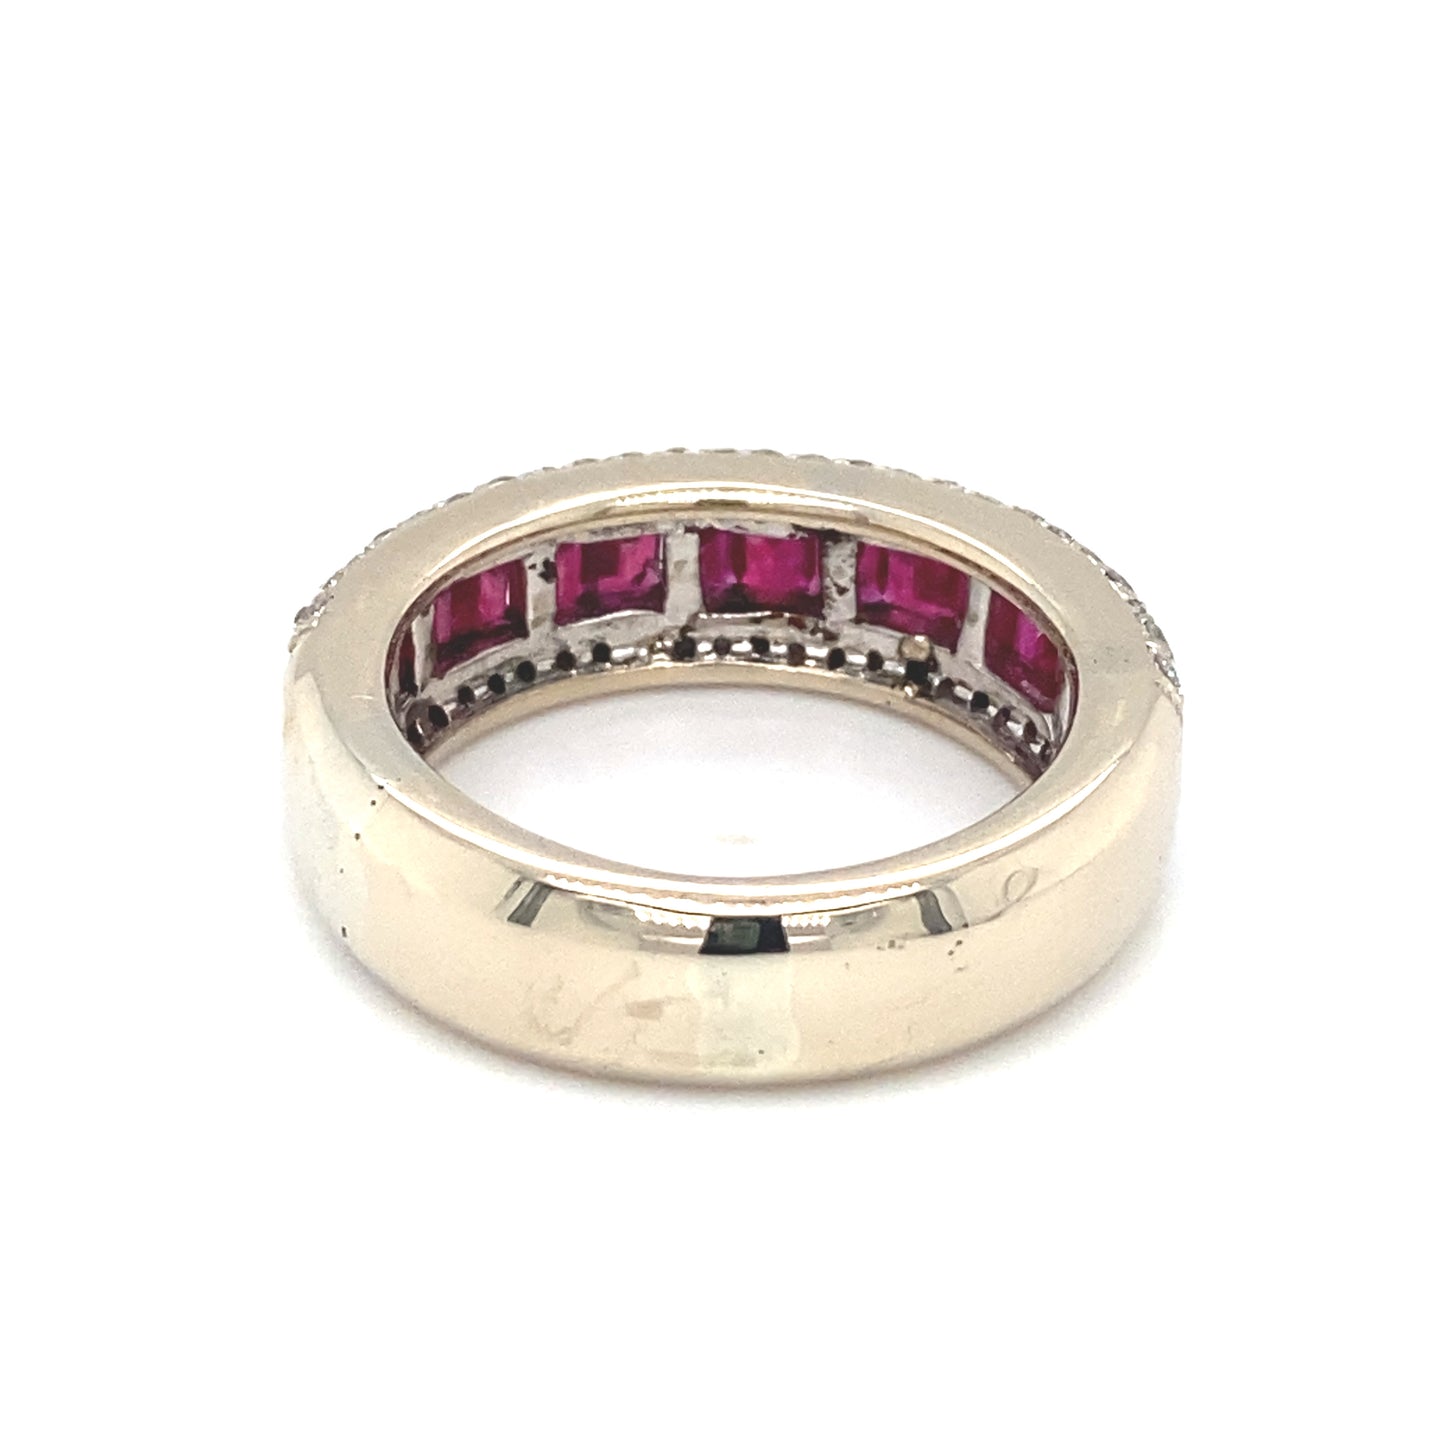 Circa 2000s Ruby and Diamond Band Ring in 18K White Gold